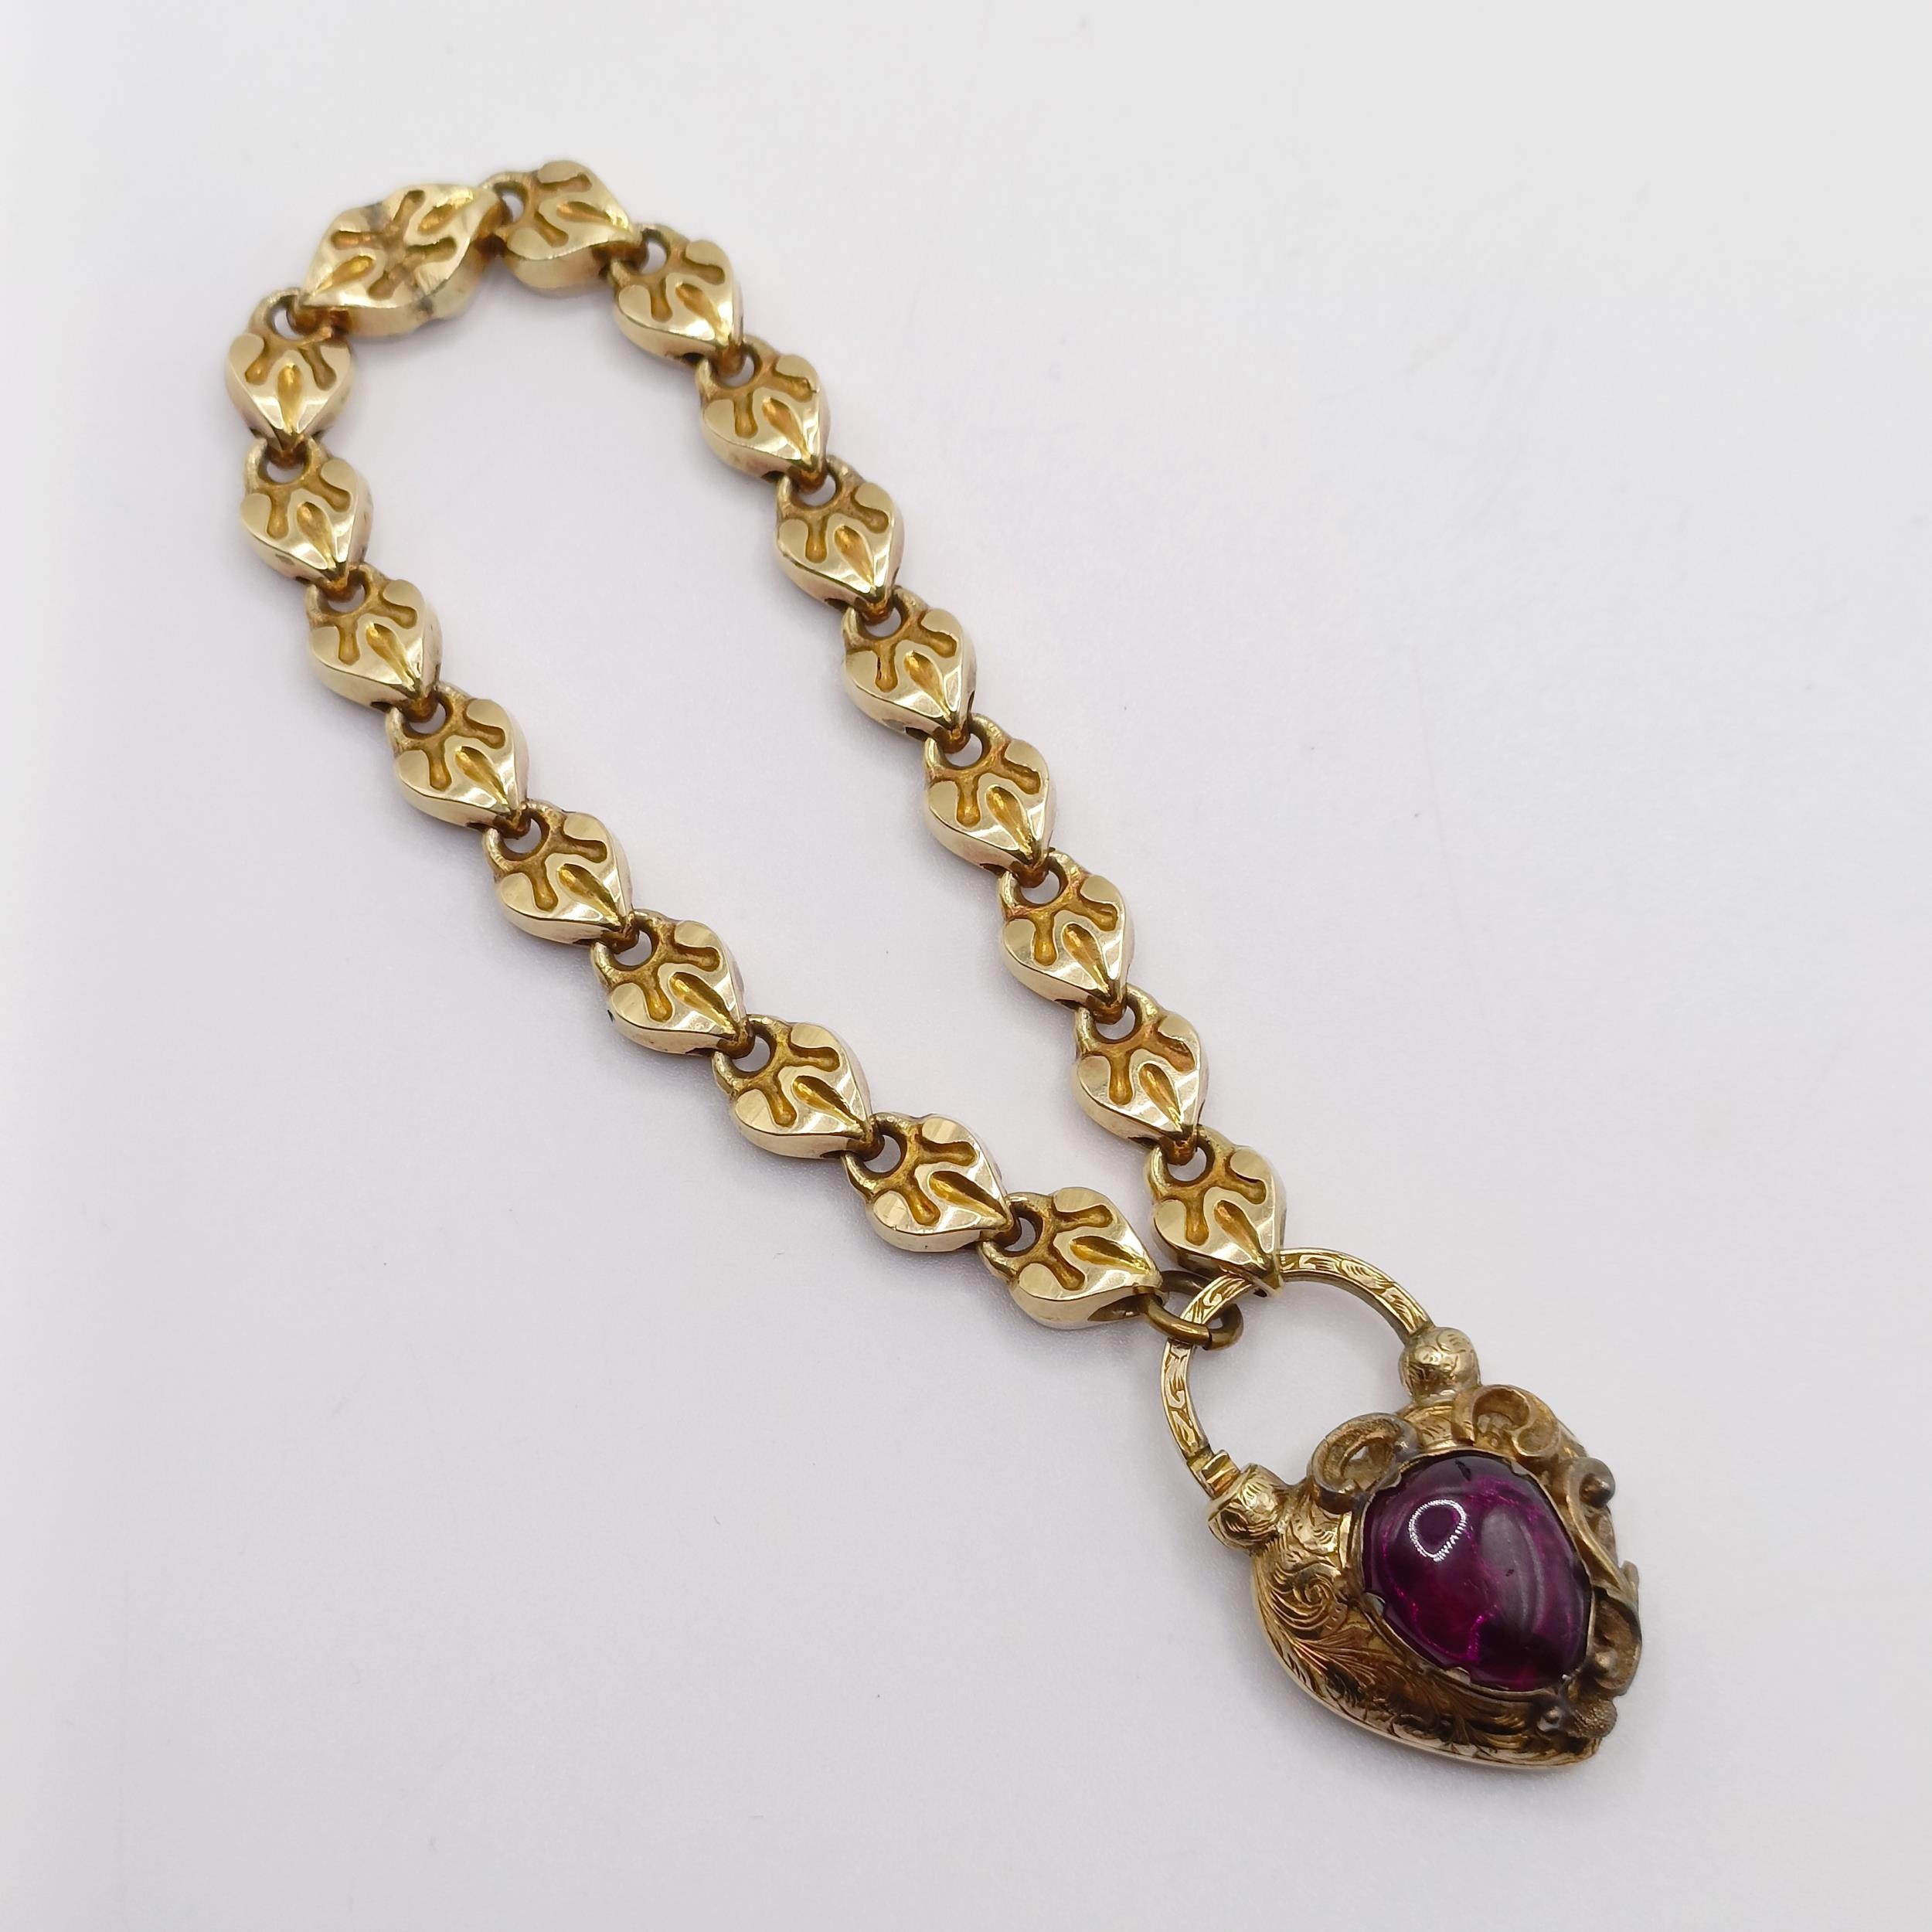 A late 19th/early 20th century yellow metal bracelet, with a padlock clasp, inset with a cabochon - Image 2 of 7